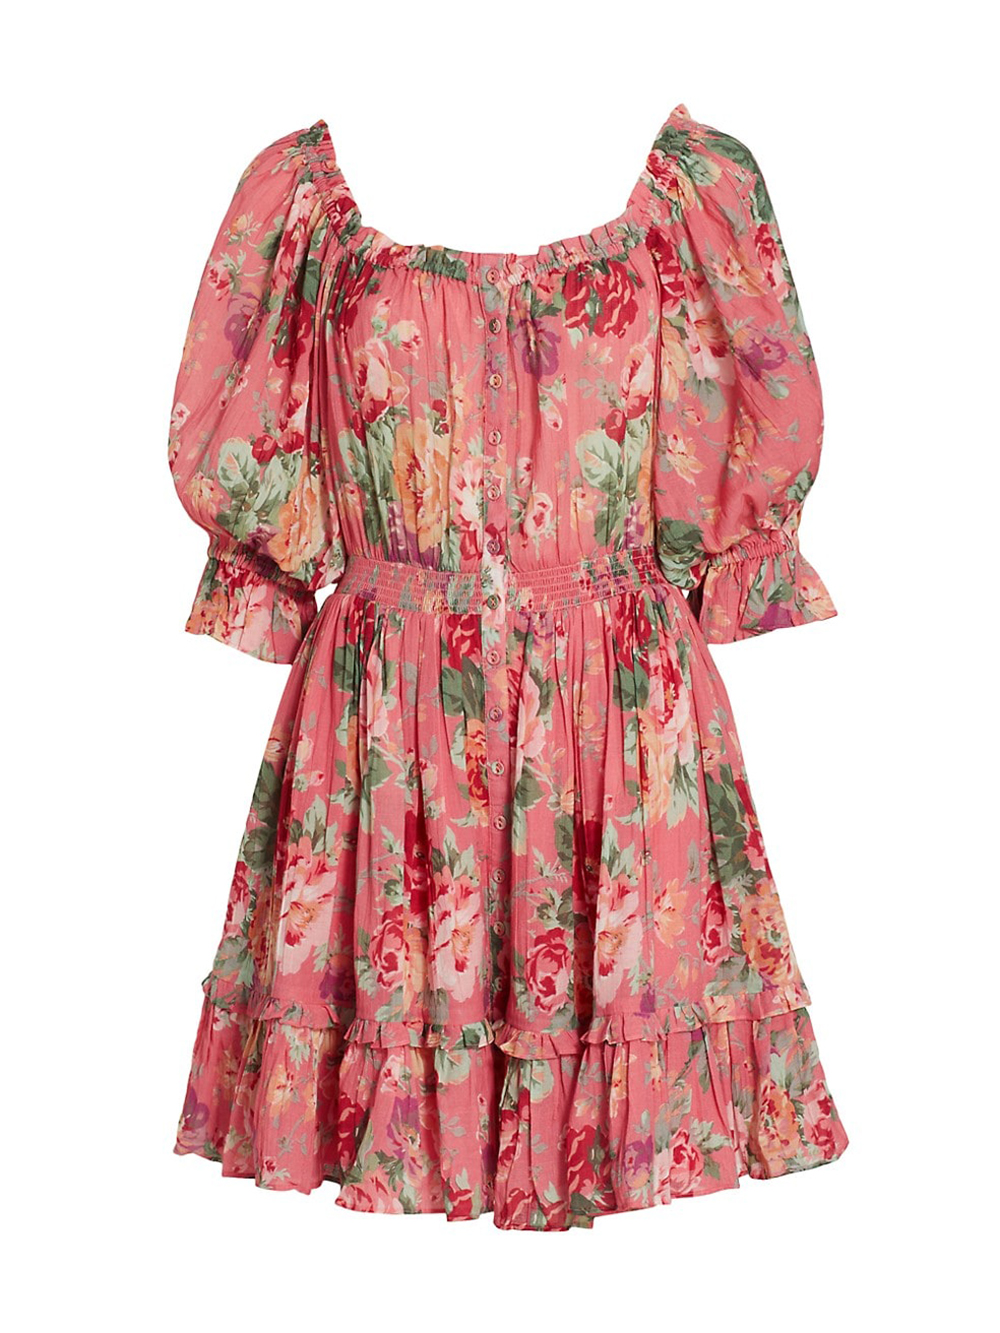 Must have floral summer dresses on MarlaMeridith.com